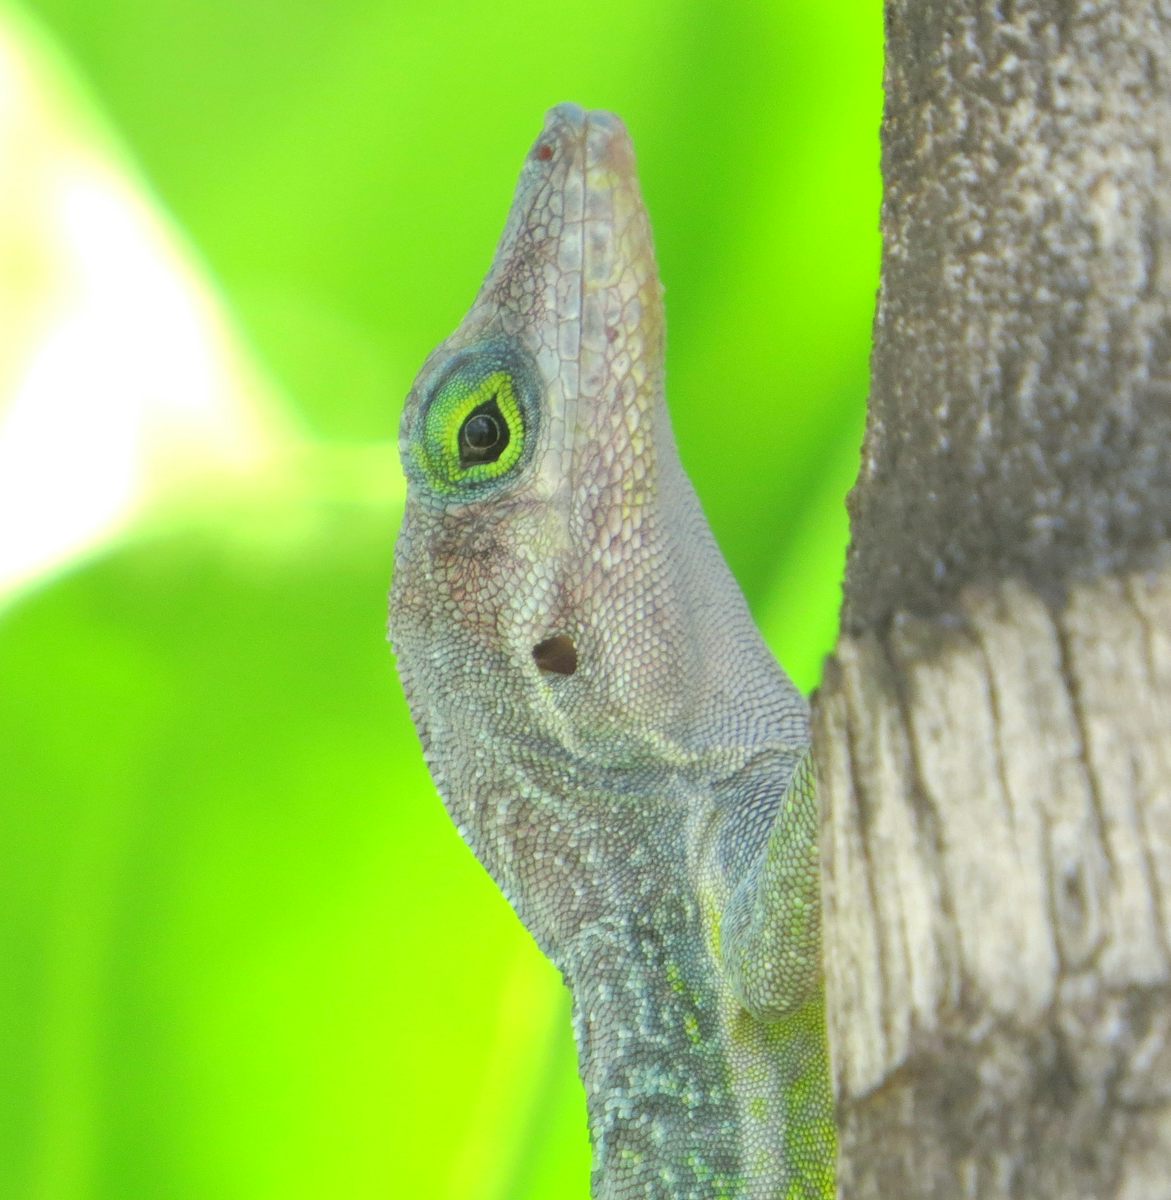 Adorable Anole lizard in St . Kitts. This is our favorite Island for its beautiful beaches.